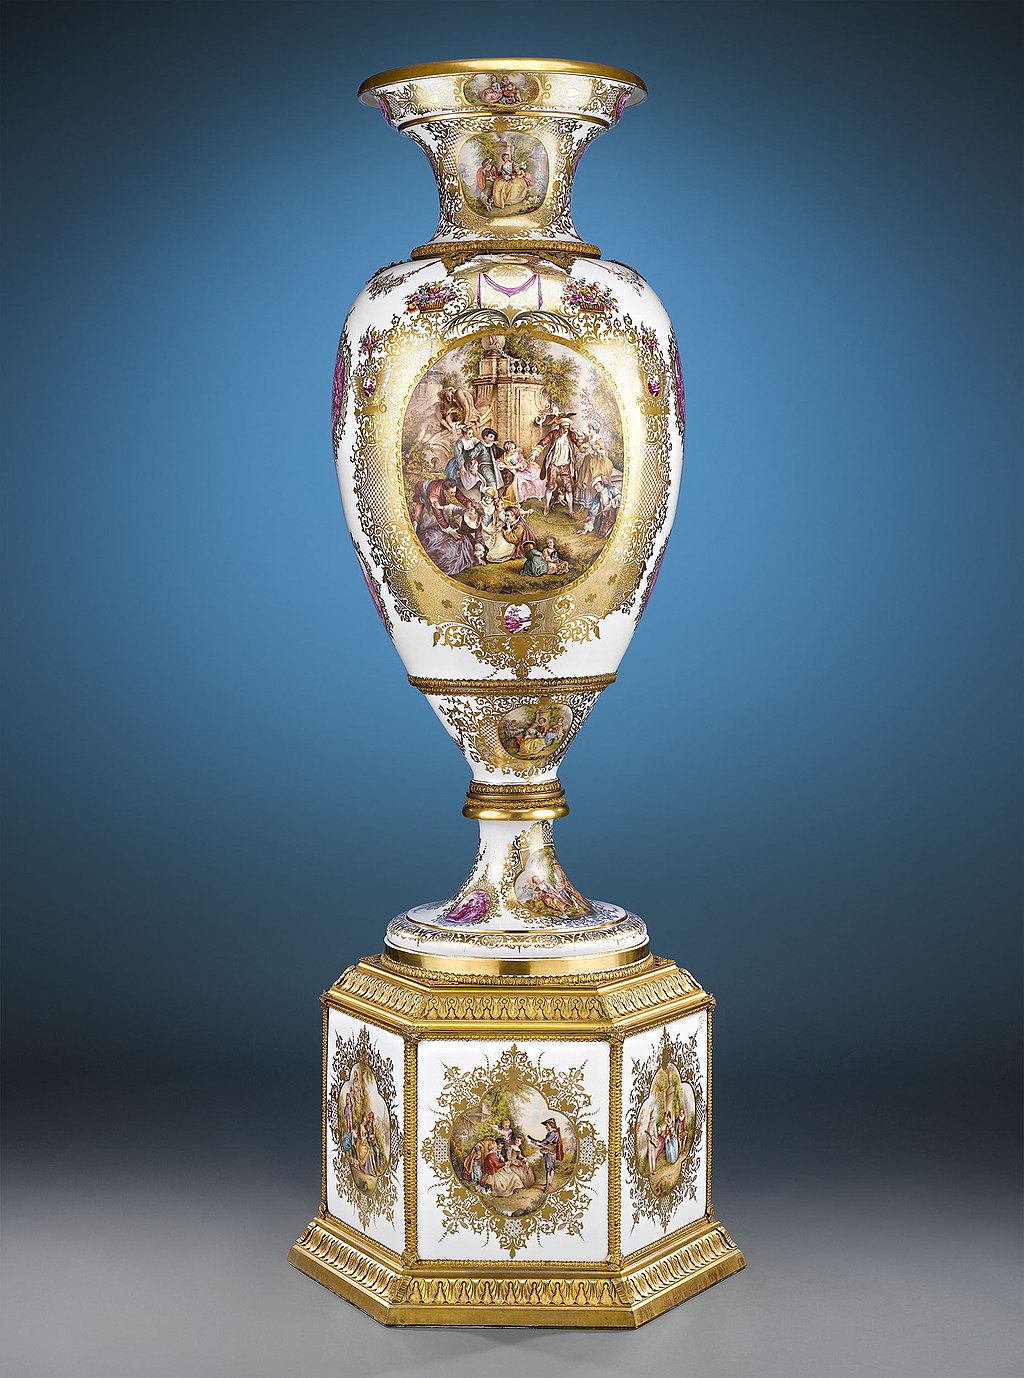 Rococo-inspired porcelain vase and plinth by KPM